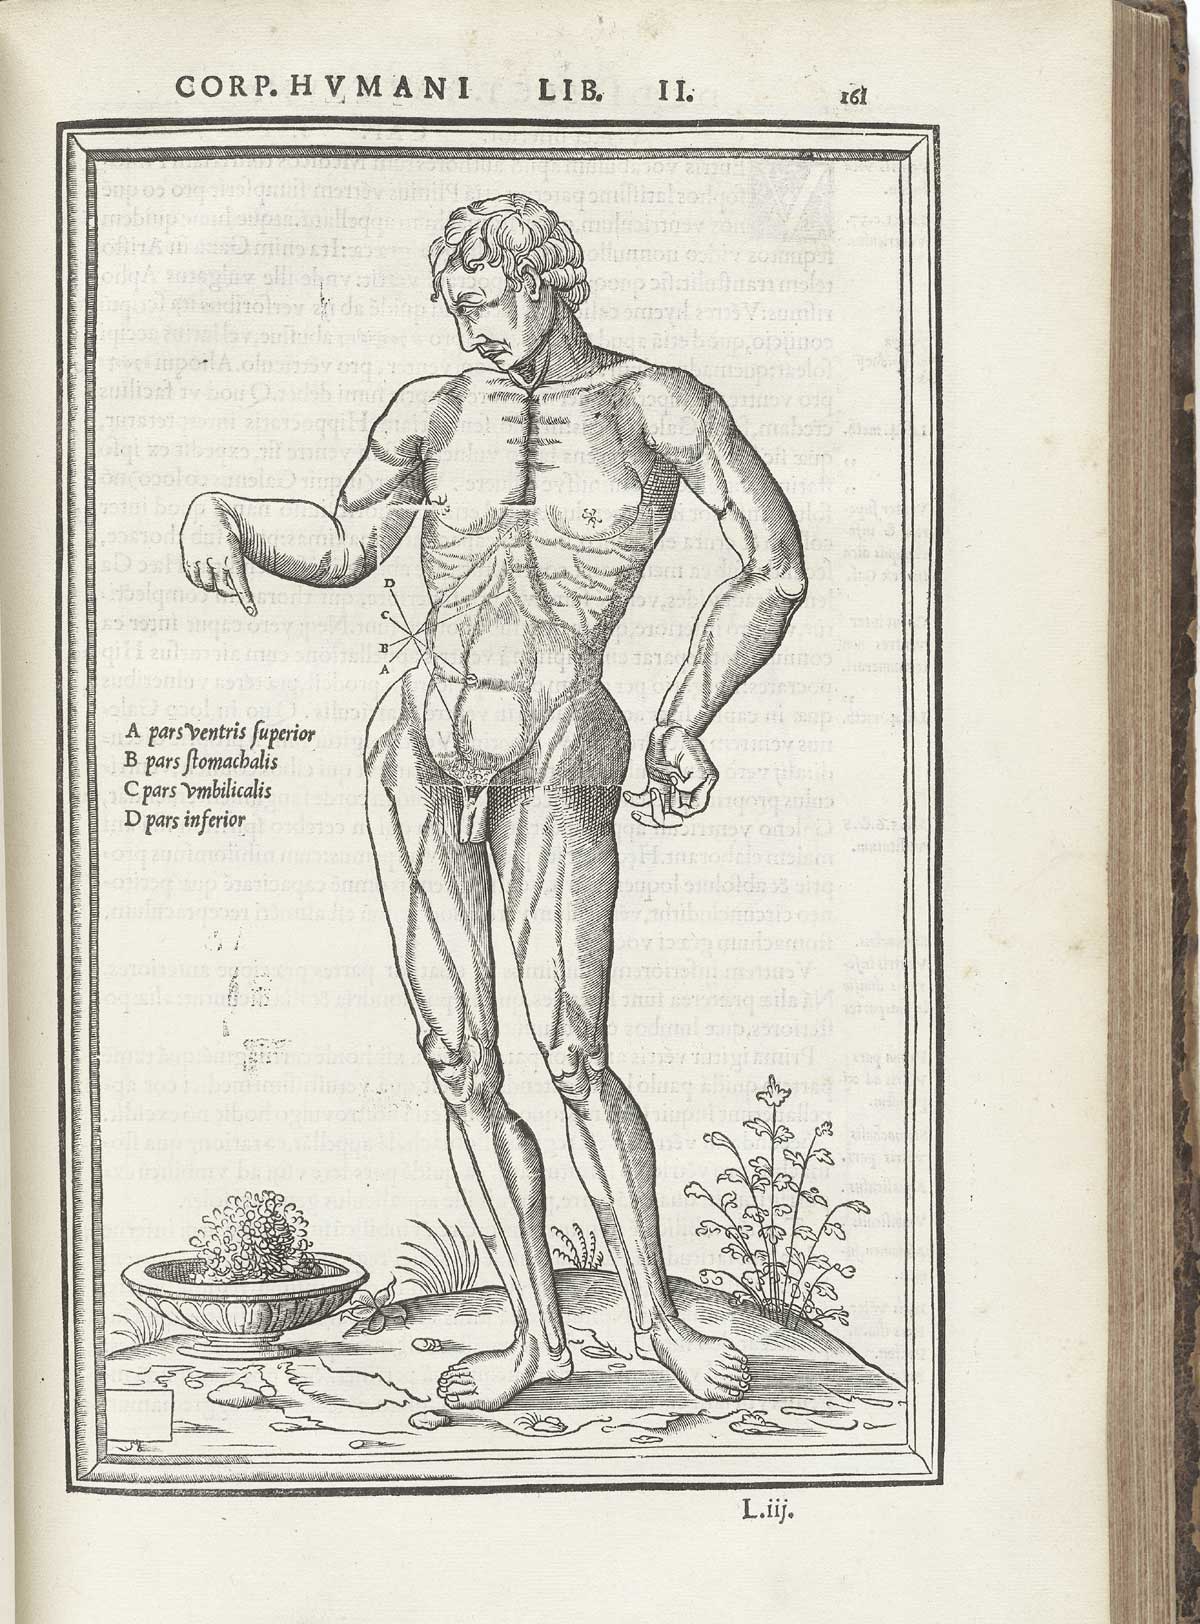 Woodcut of a standing facing male nude figure showing the muscles in particular, standing in a pastoral setting in Classical pose looking down and to the left with right hand pointing down to his abdomen, with index lines and letters referring to muscles of the abdomen with text in Latin just to the left naming the abdominal muscles, from Charles Estienne’s De dissection partium corporis humani libri tres, NLM Call no.: WZ 240 E81dd 1545.